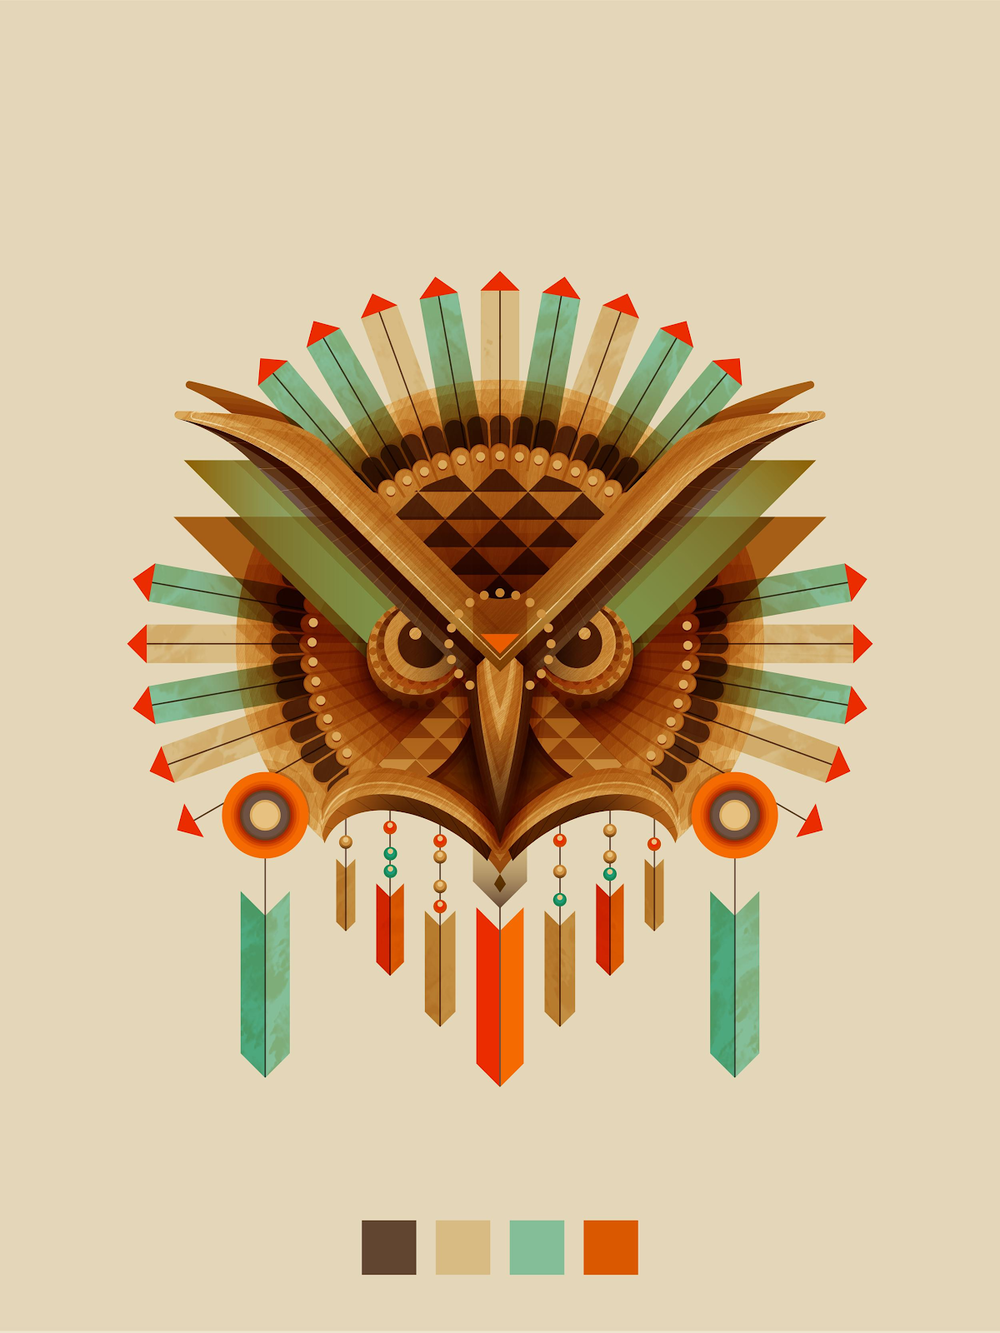 Student work by Jeremy Kramer for   Illustration for Designers: Create Your Own Geometric Animal